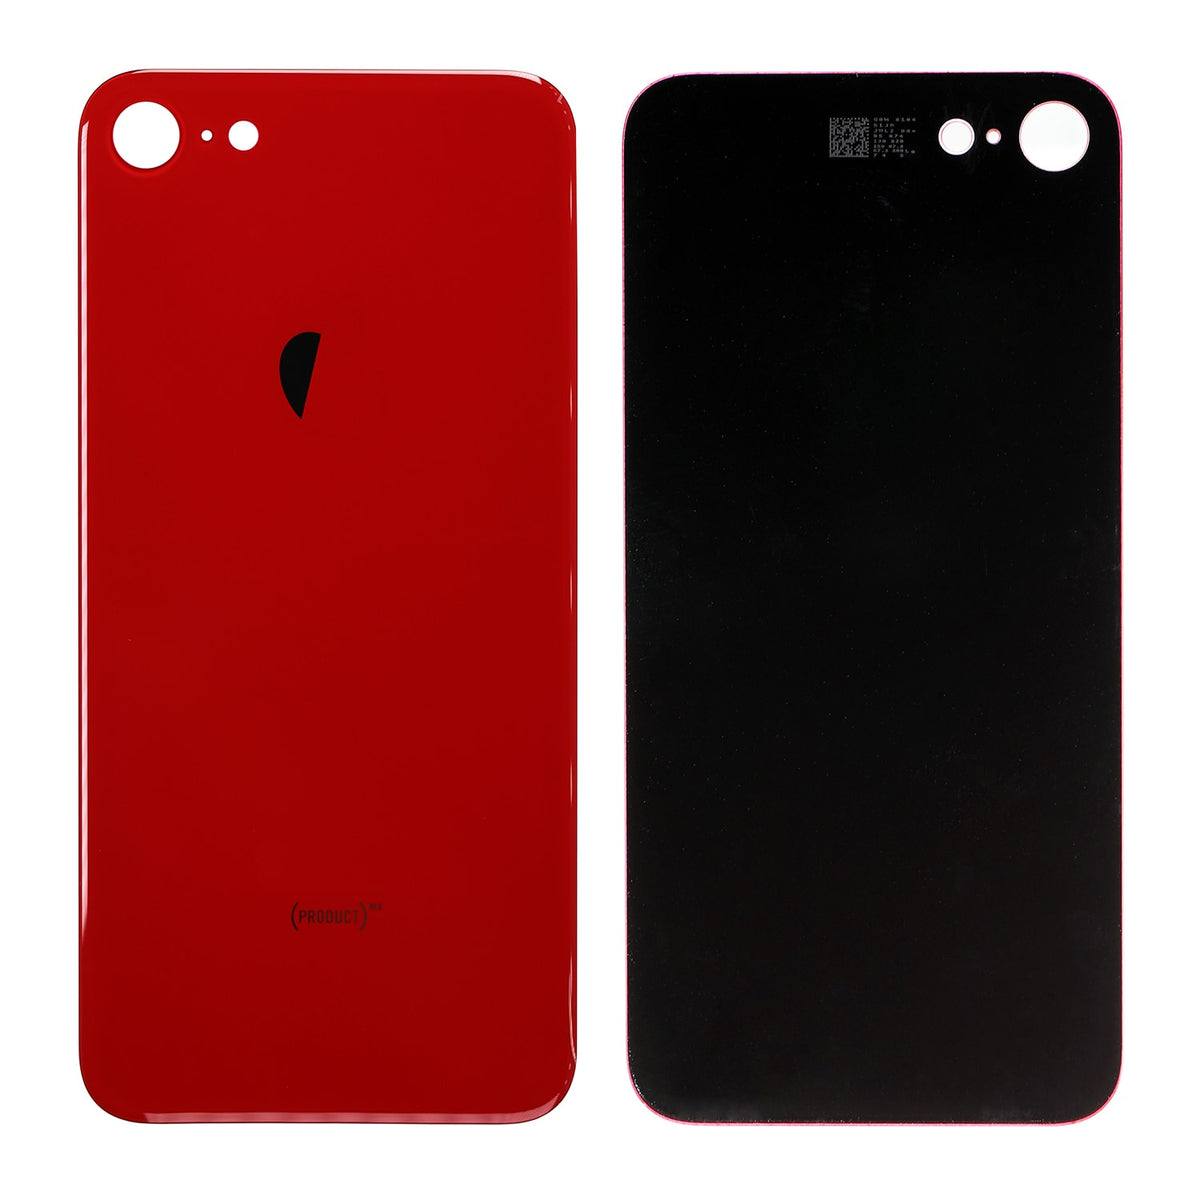 RED BACK COVER FOR IPHONE 8